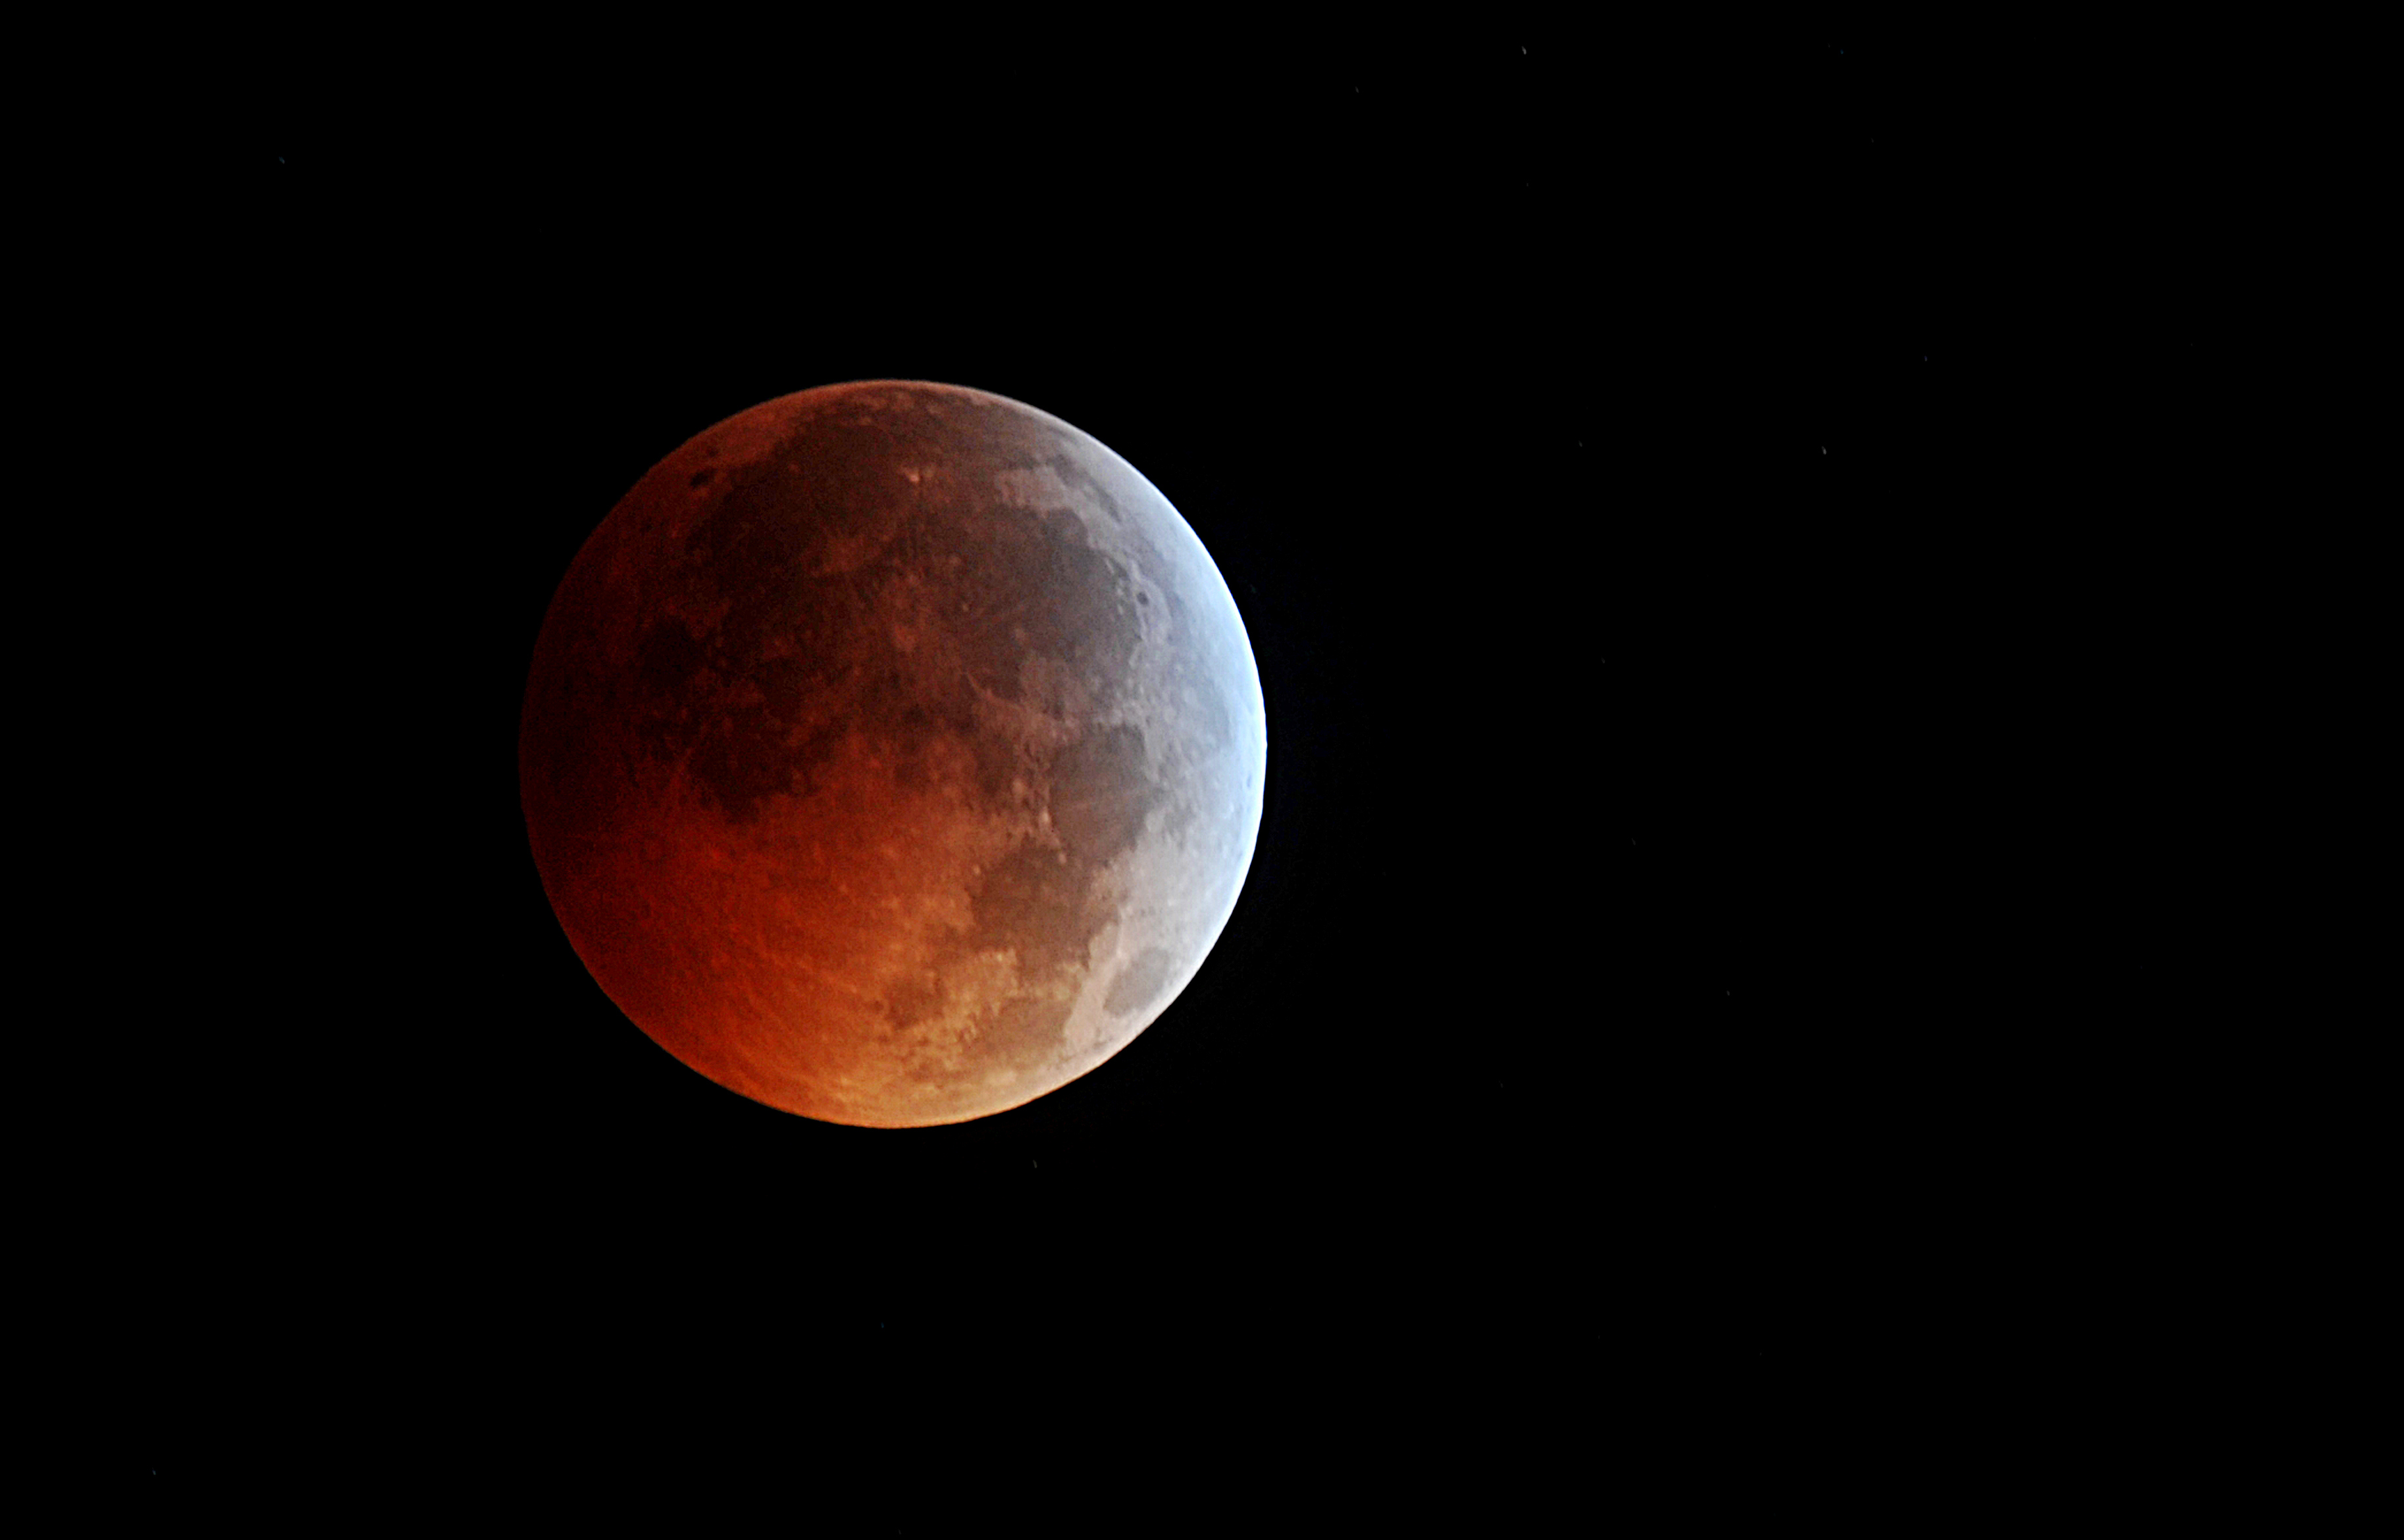 Lights out: a blood moon as a total lunar eclipse reaches its peak